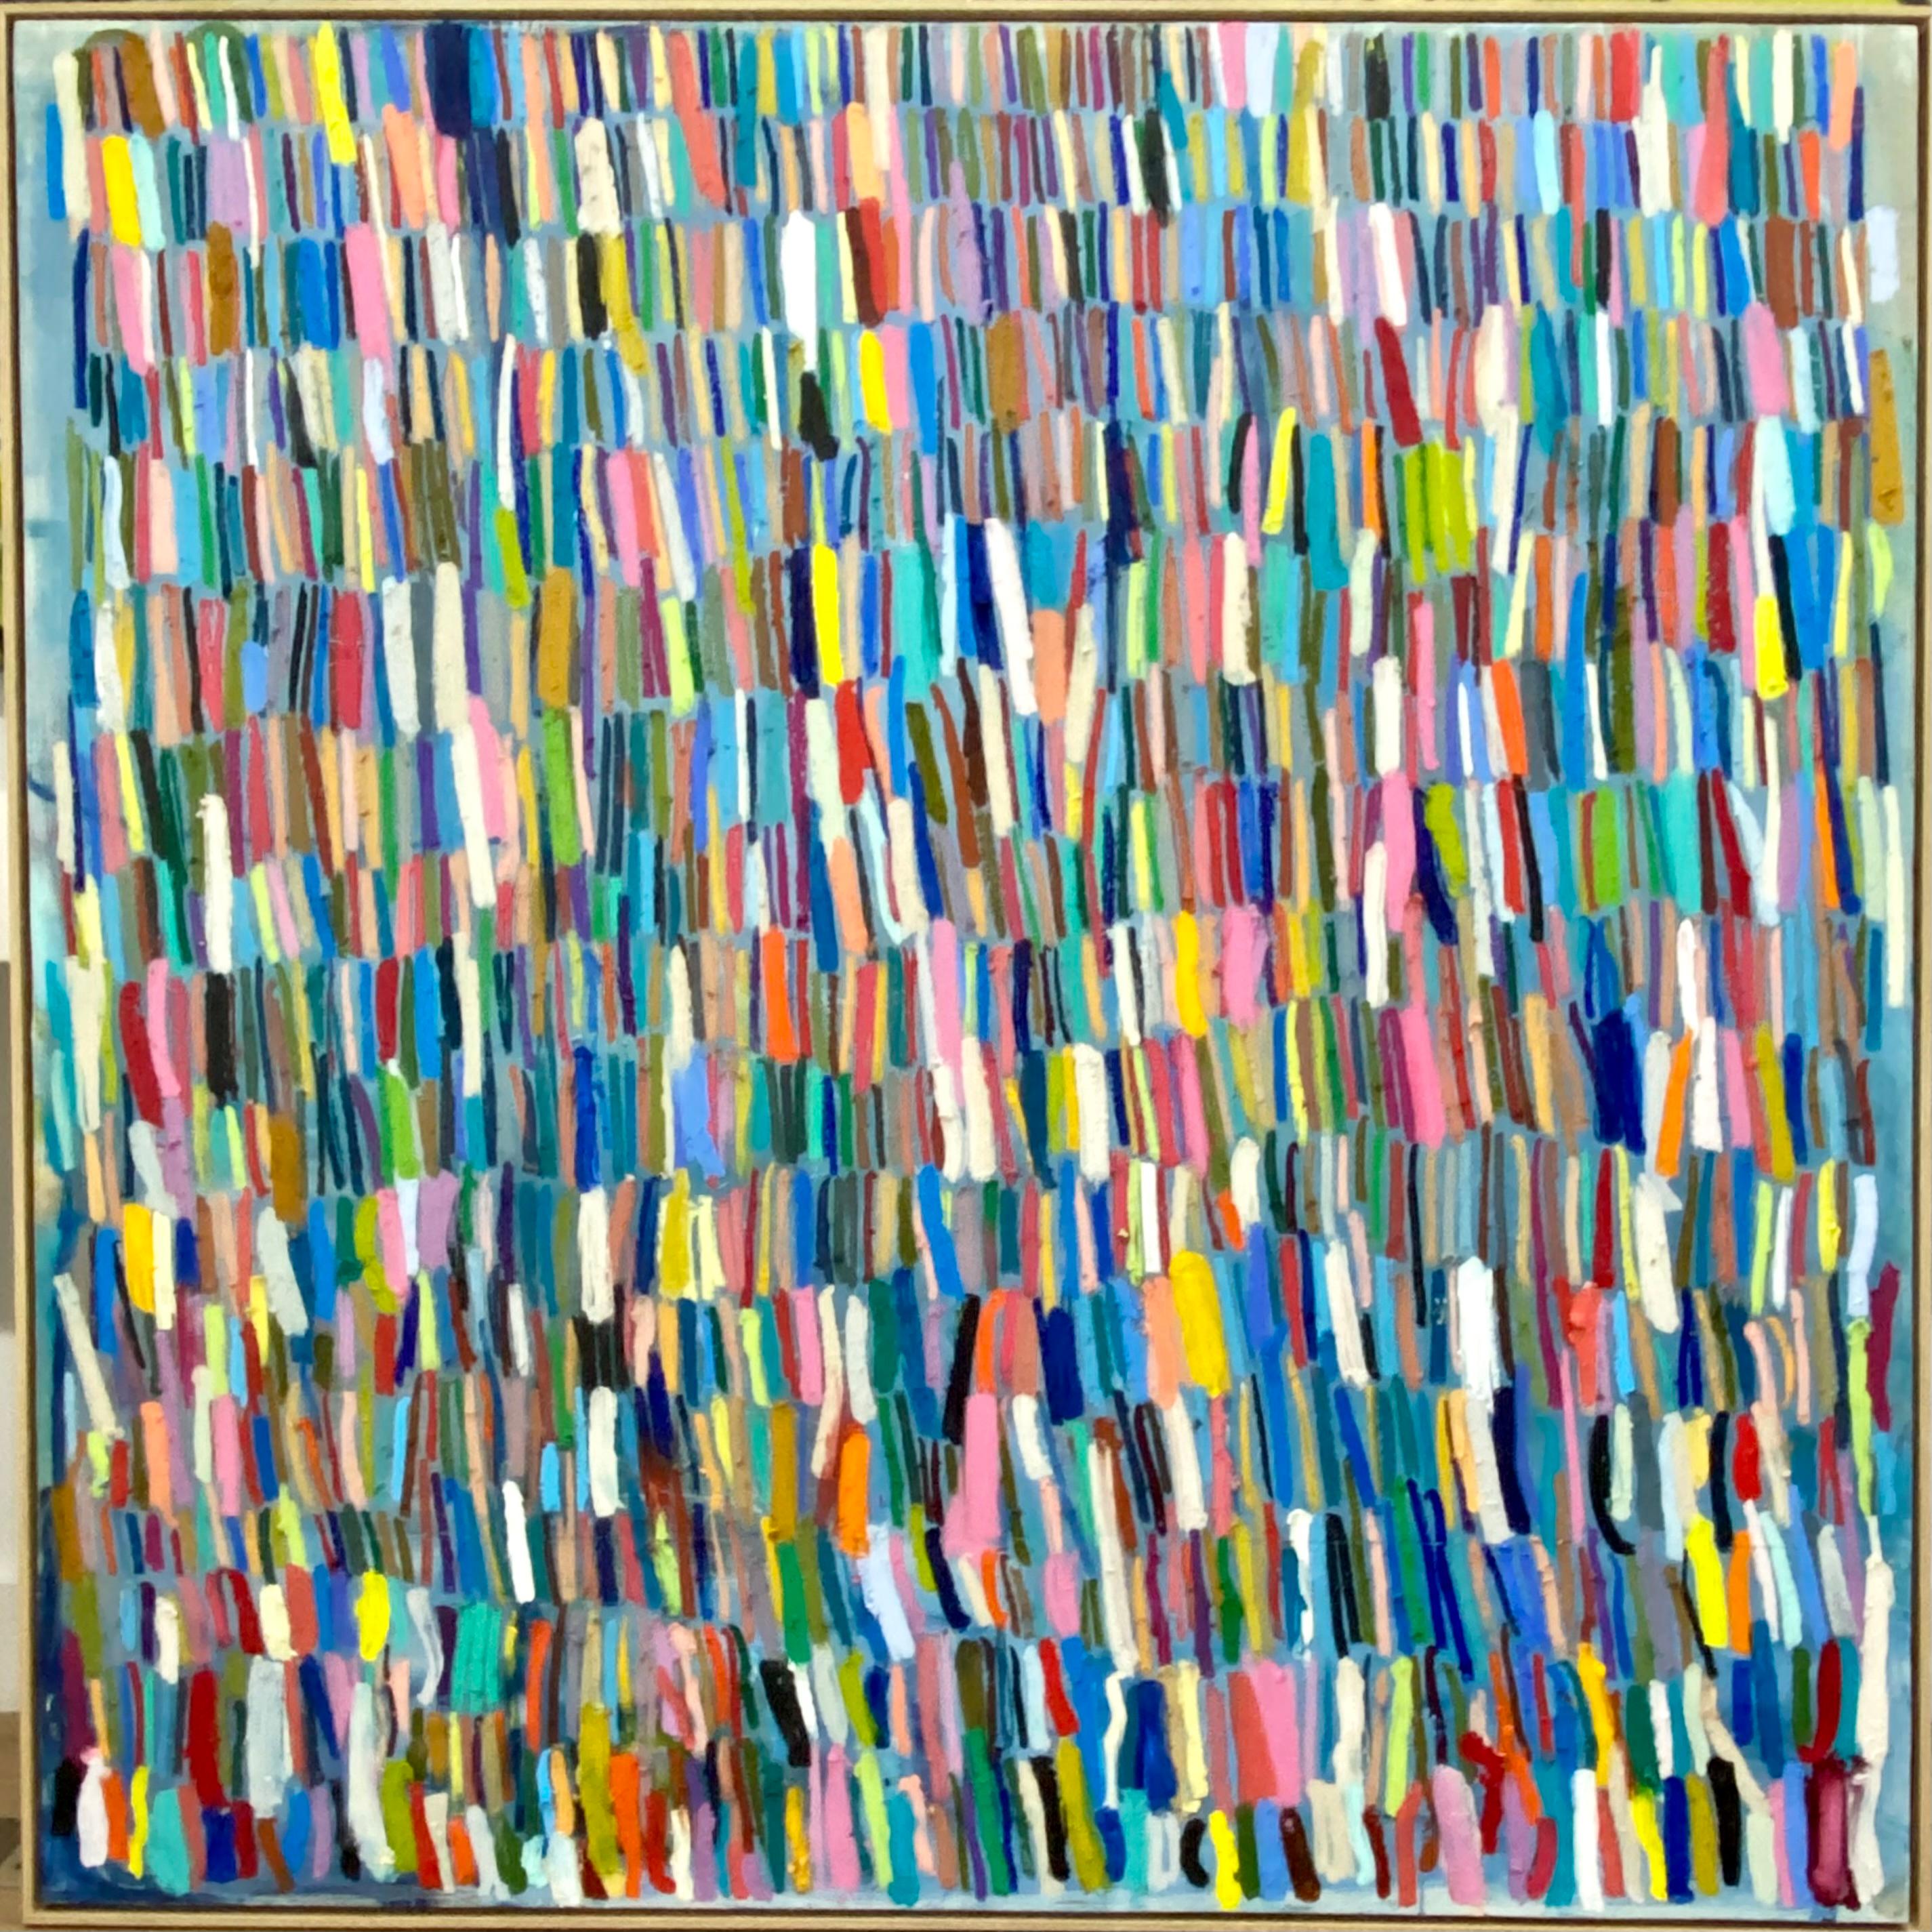 Colleen Leach is a self taught artist.  She believes that art evokes the human spirit. Heavily influenced by music, Colleen's work explores the relationship of playful bold linear works, texture and the use of color blocks as a primary compositional